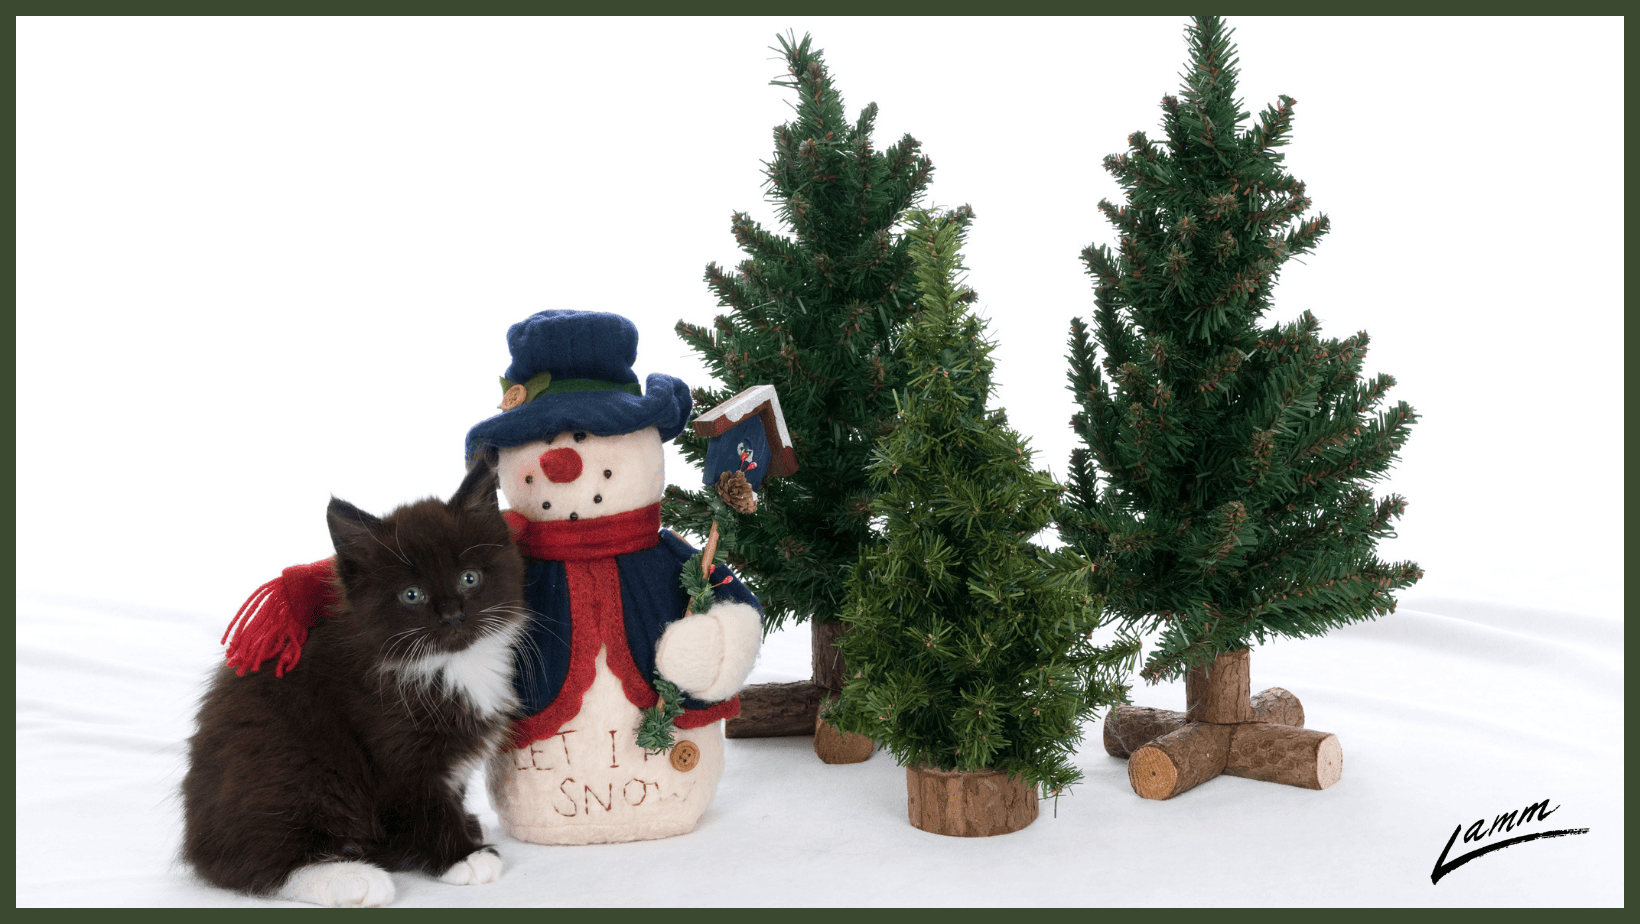 Two toy evergreen trees next to a toy snowman with a small black-and-white kitten on the far left. Background is white with a dark green border.